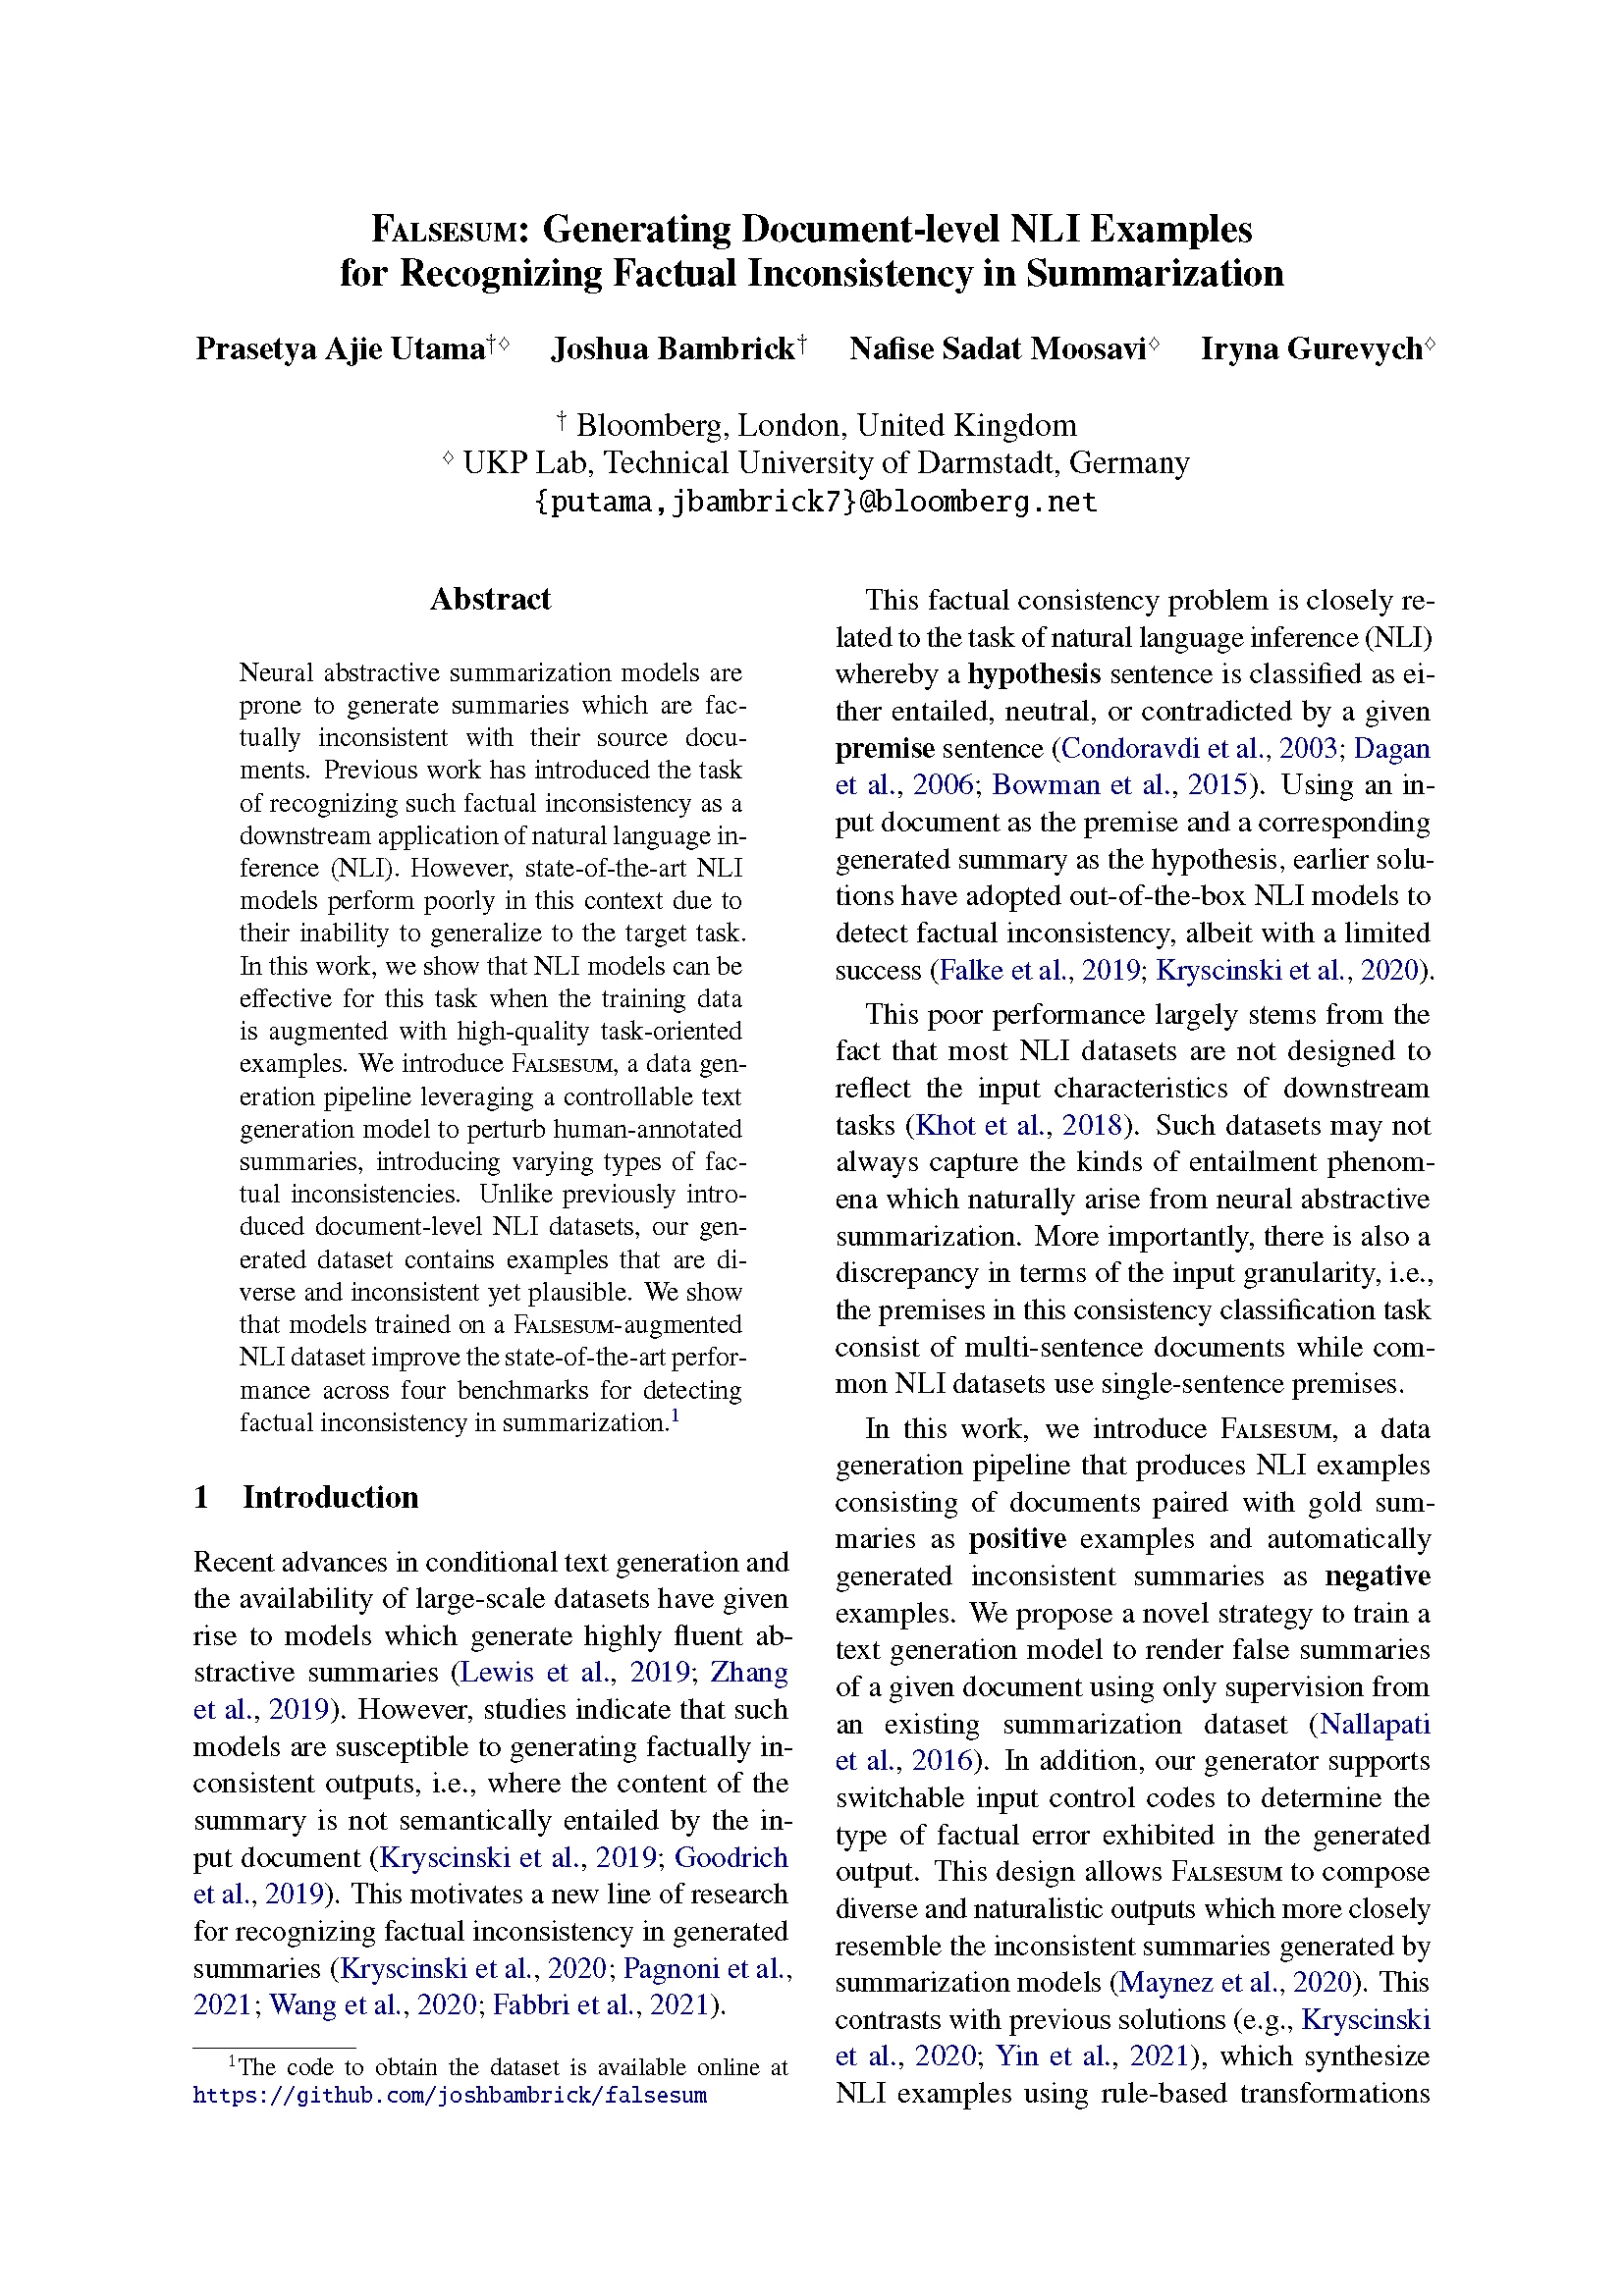 Front page of paper published at NAACL 2022 titled "Falsesum: Generating Document-level NLI Examples for Recognizing Factual Inconsistency in Summarization"